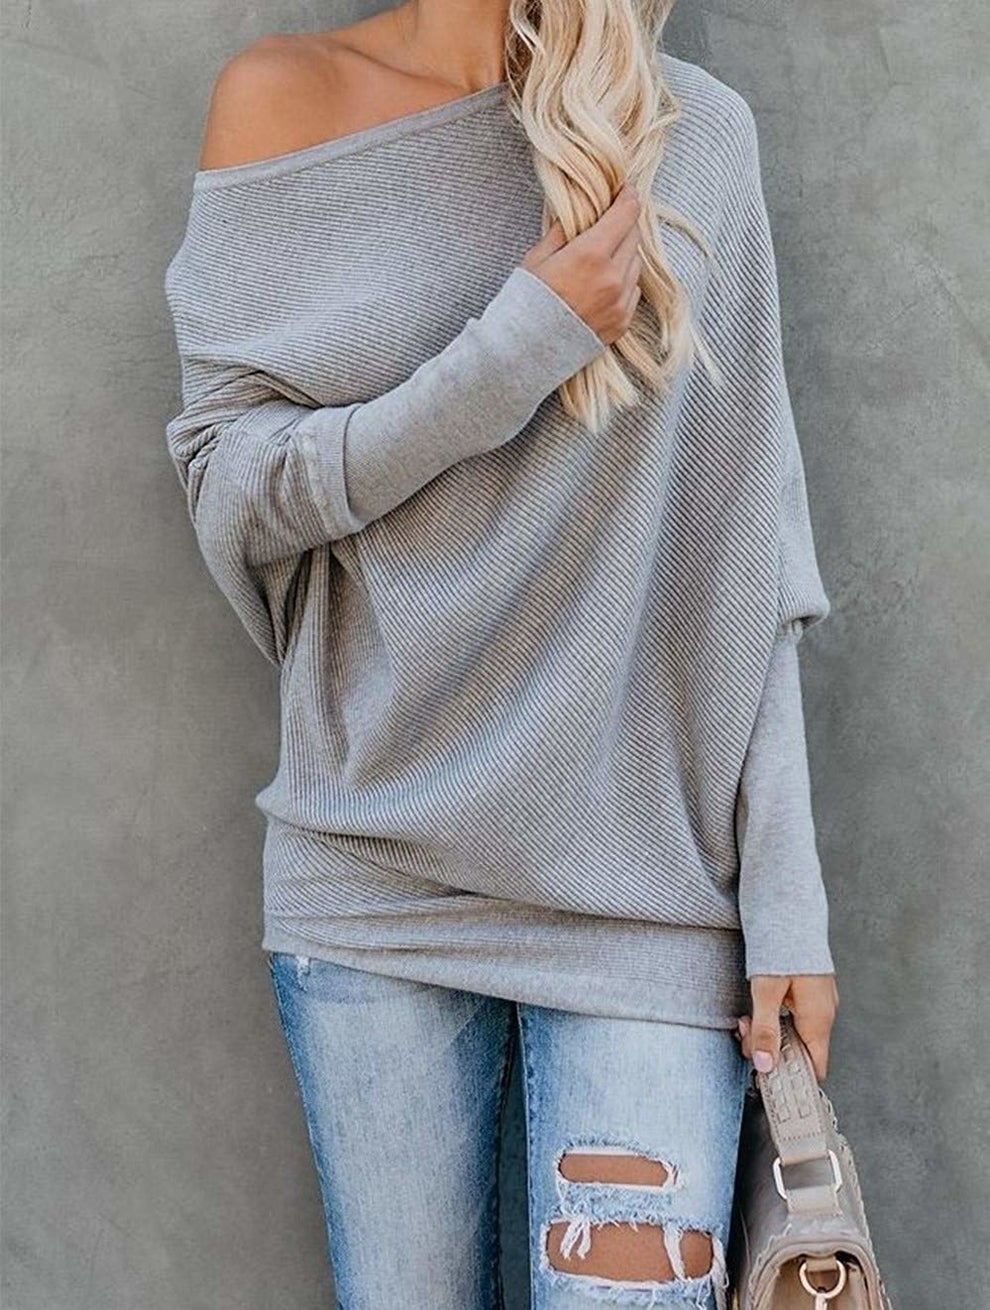 24 Affordable And Comfy Sweaters You'll Almost Never Want To Take Off